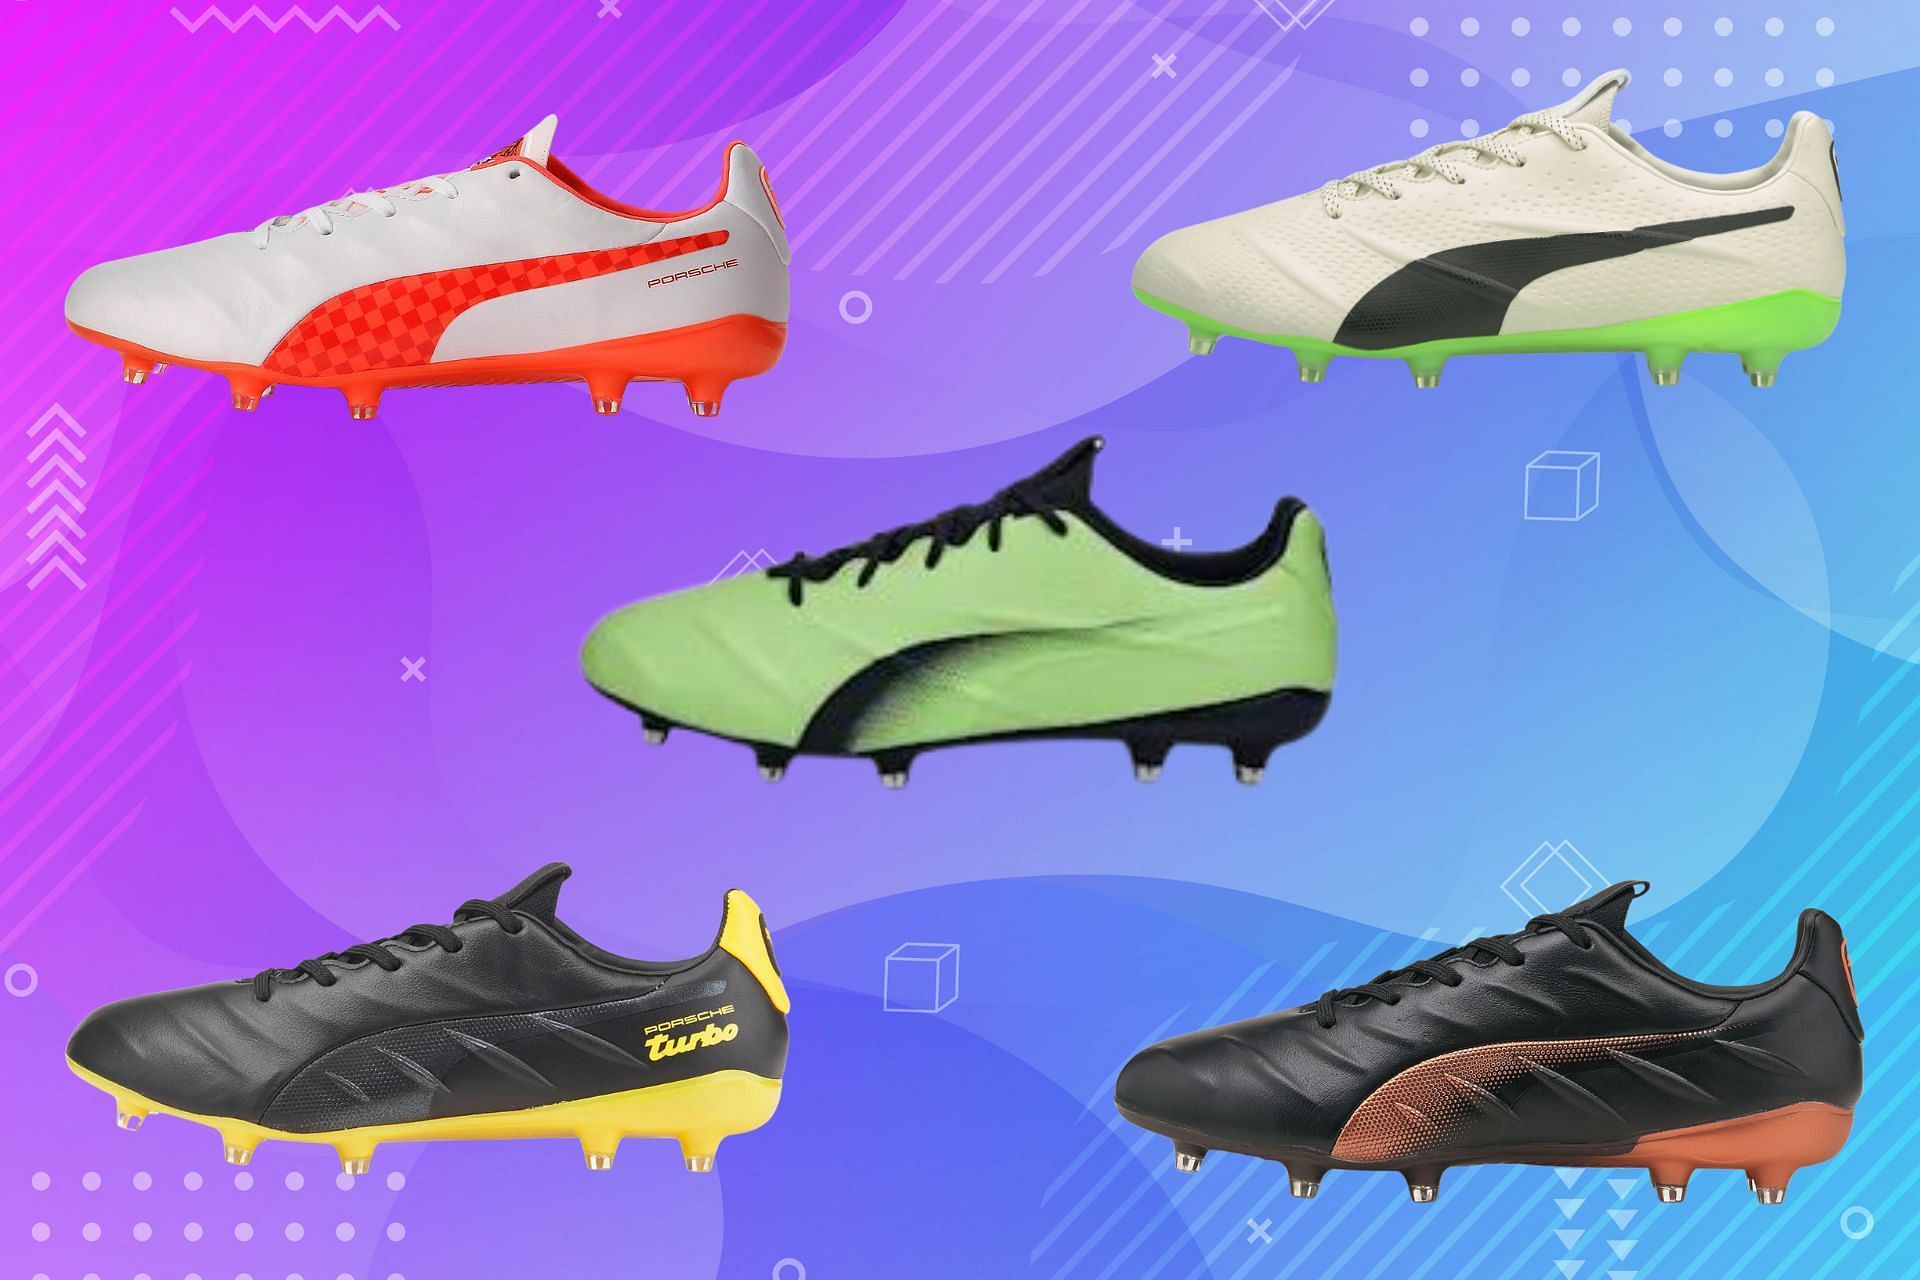 5 best Puma King Platinum boot releases of